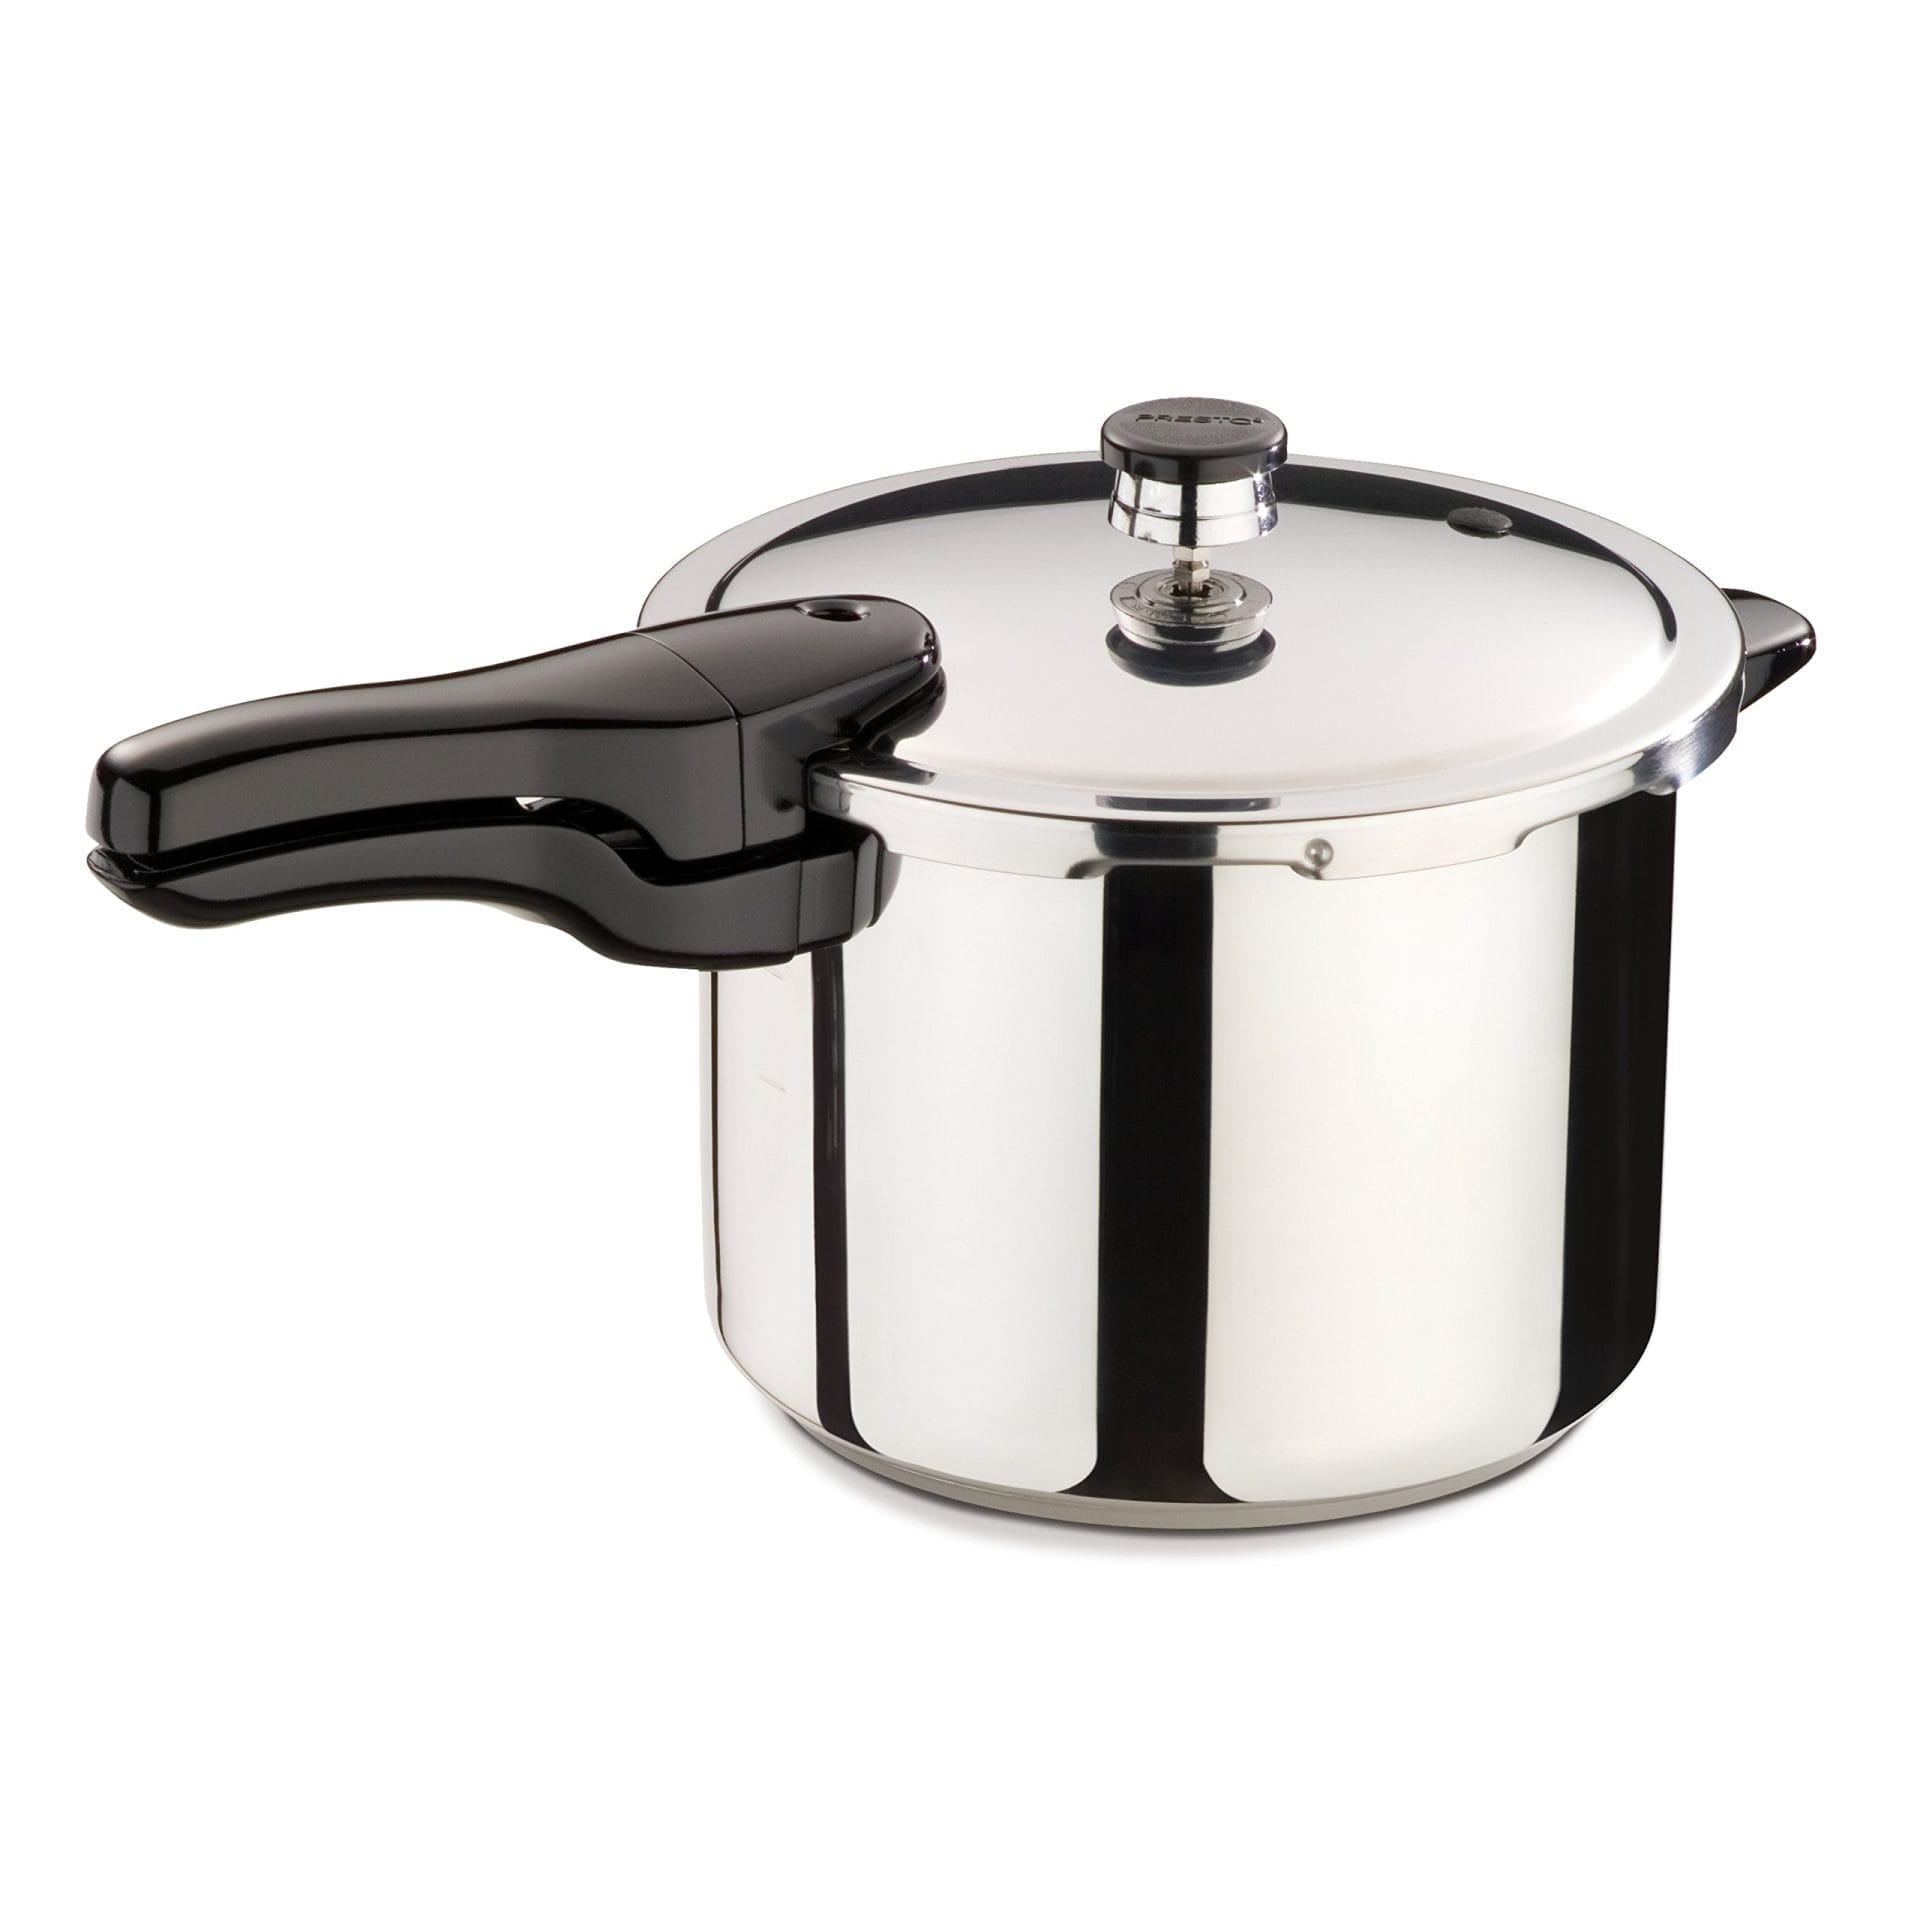 10 best stainless steel pressure cookers tested reviewed 1145 20 2